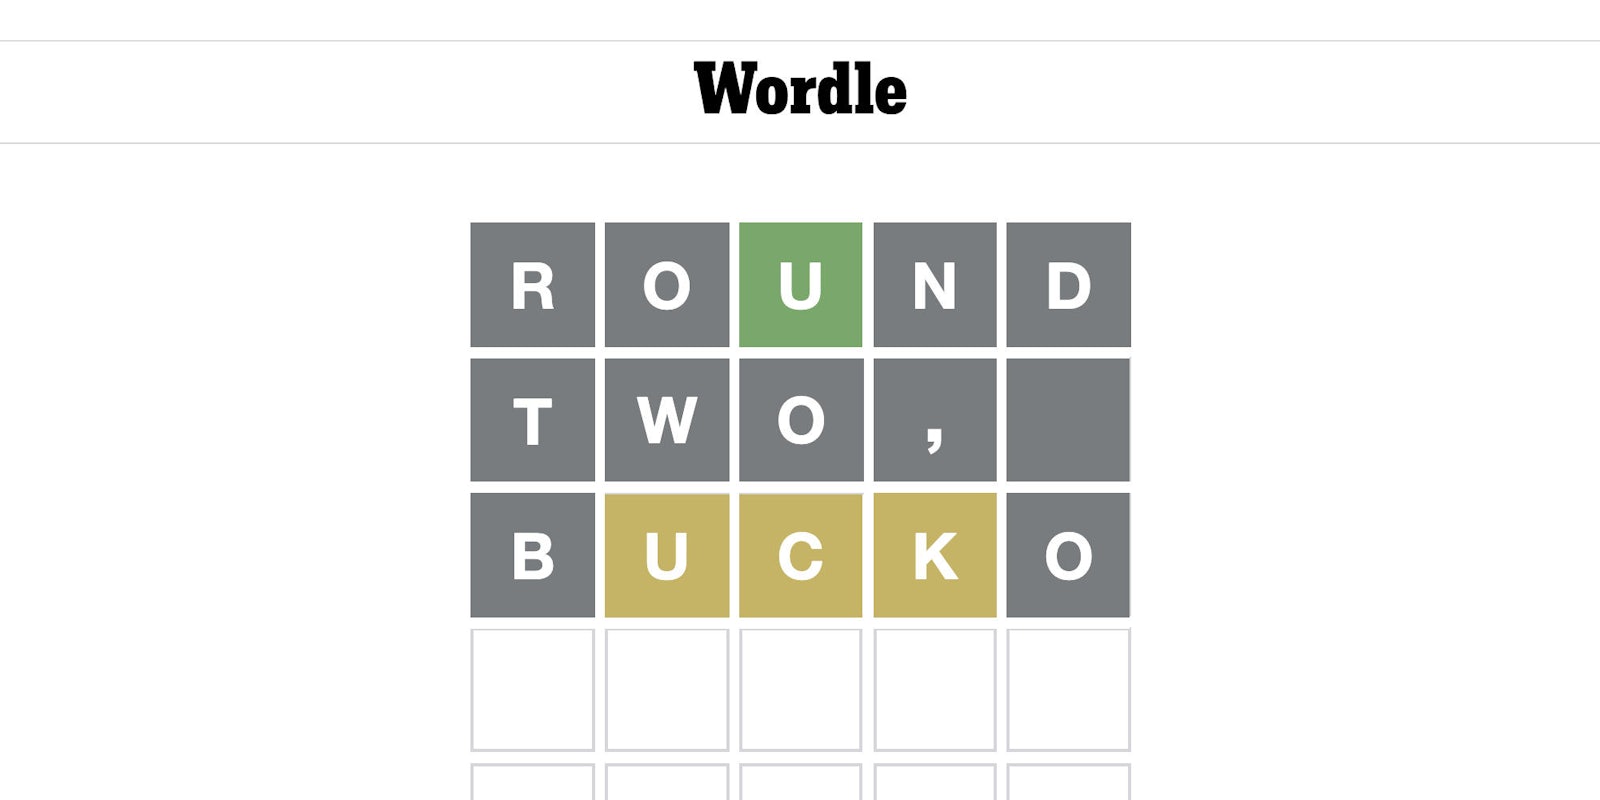 a game of Wordle that spells out 'Round two, bucko'